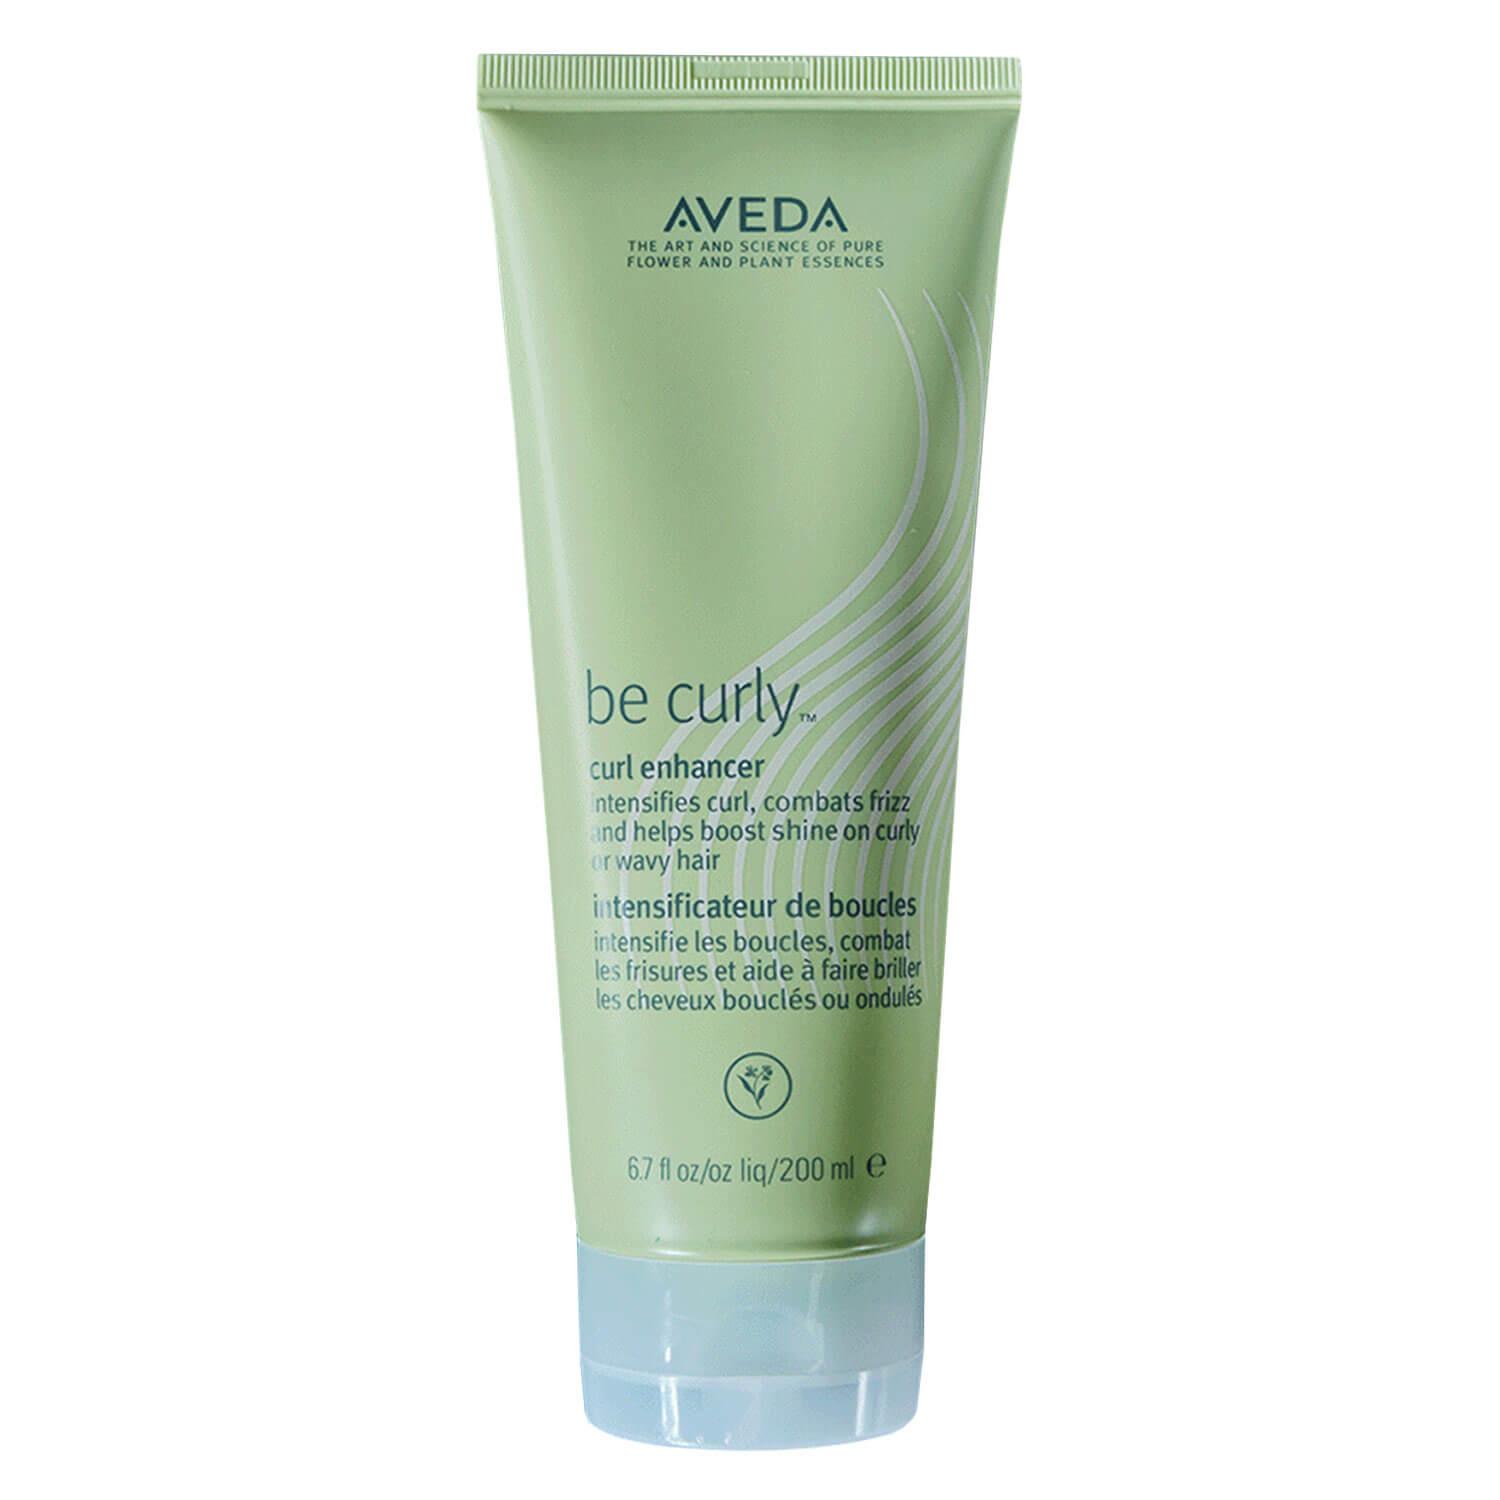 be curly - curl enhancer